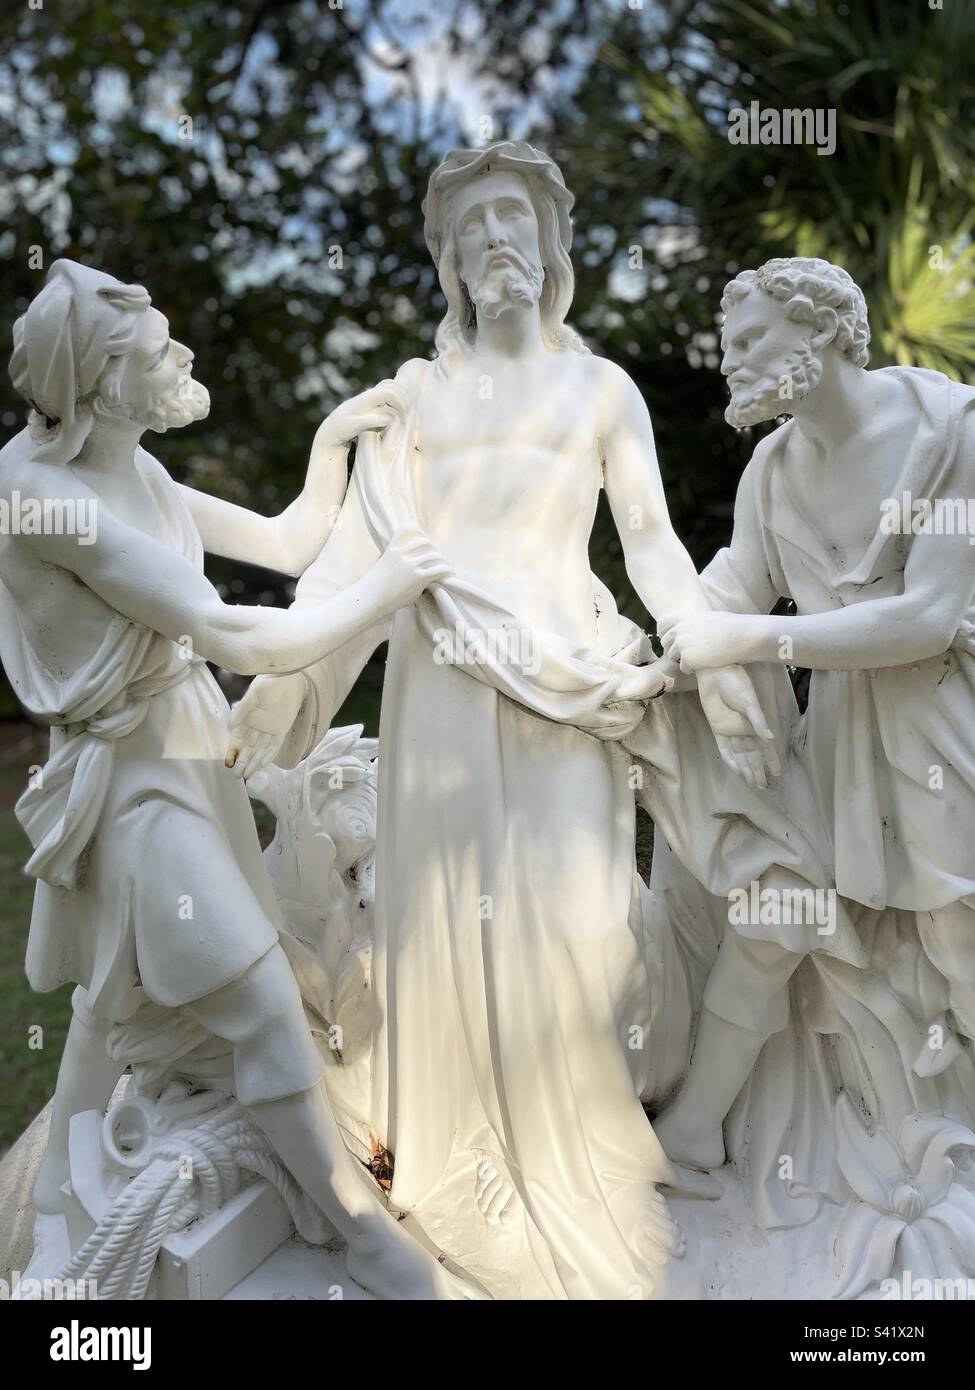 Jesus stripped of his garments, stations of the cross, white nearly life-size statues, 10th station, portrait mode Stock Photo